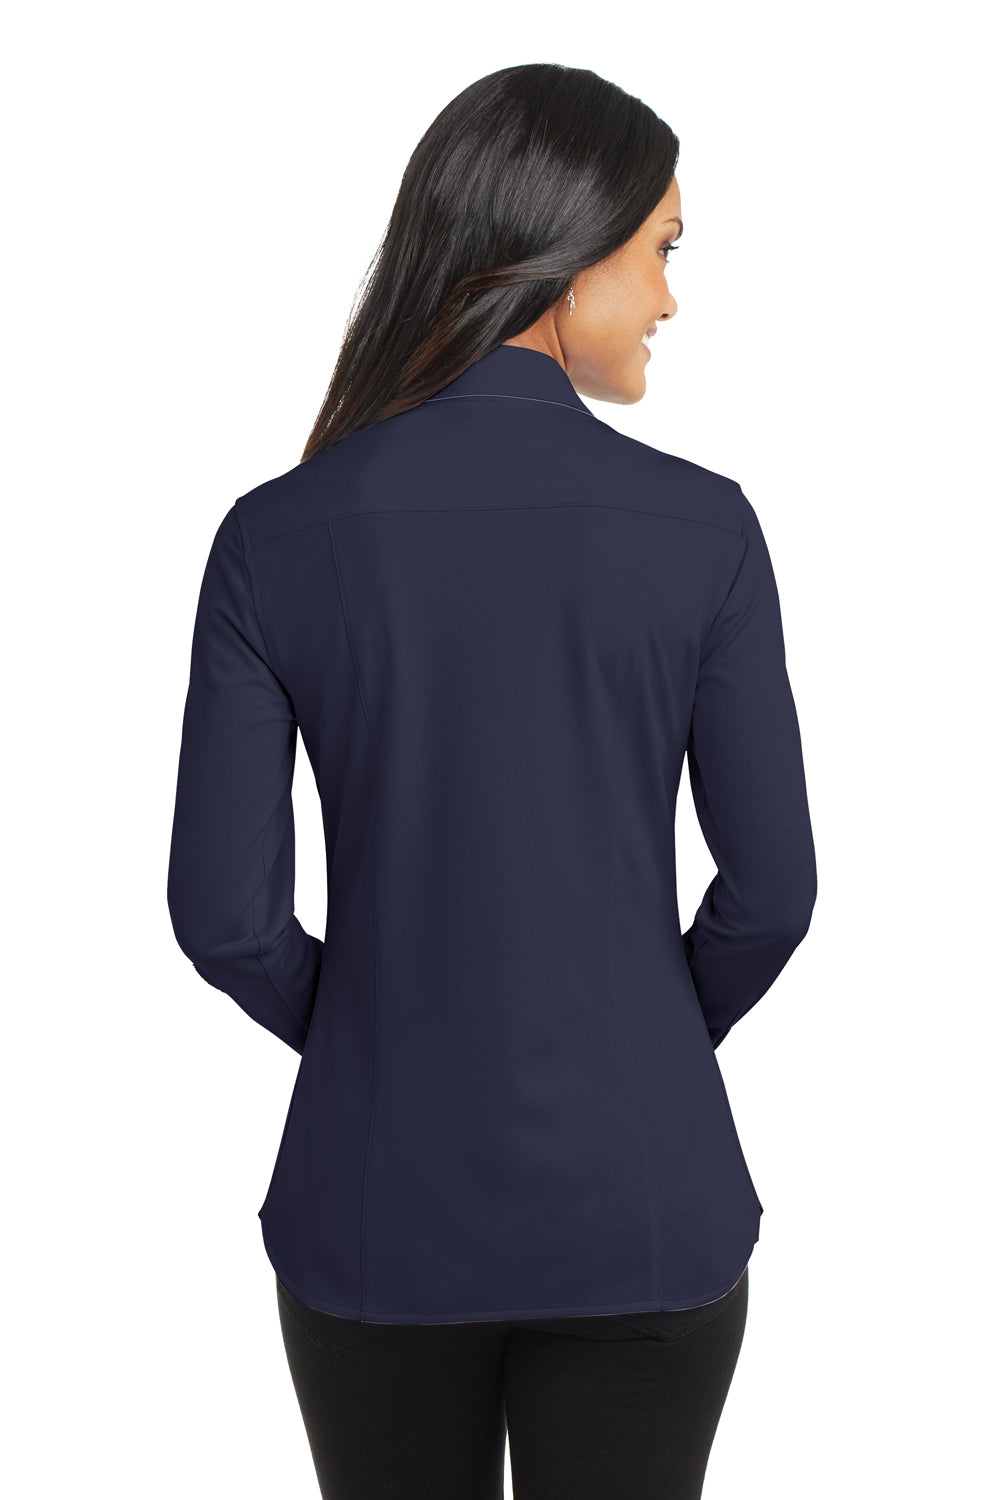 Port Authority L570 Womens Dimension Moisture Wicking Long Sleeve Button Down Shirt Navy Blue Back